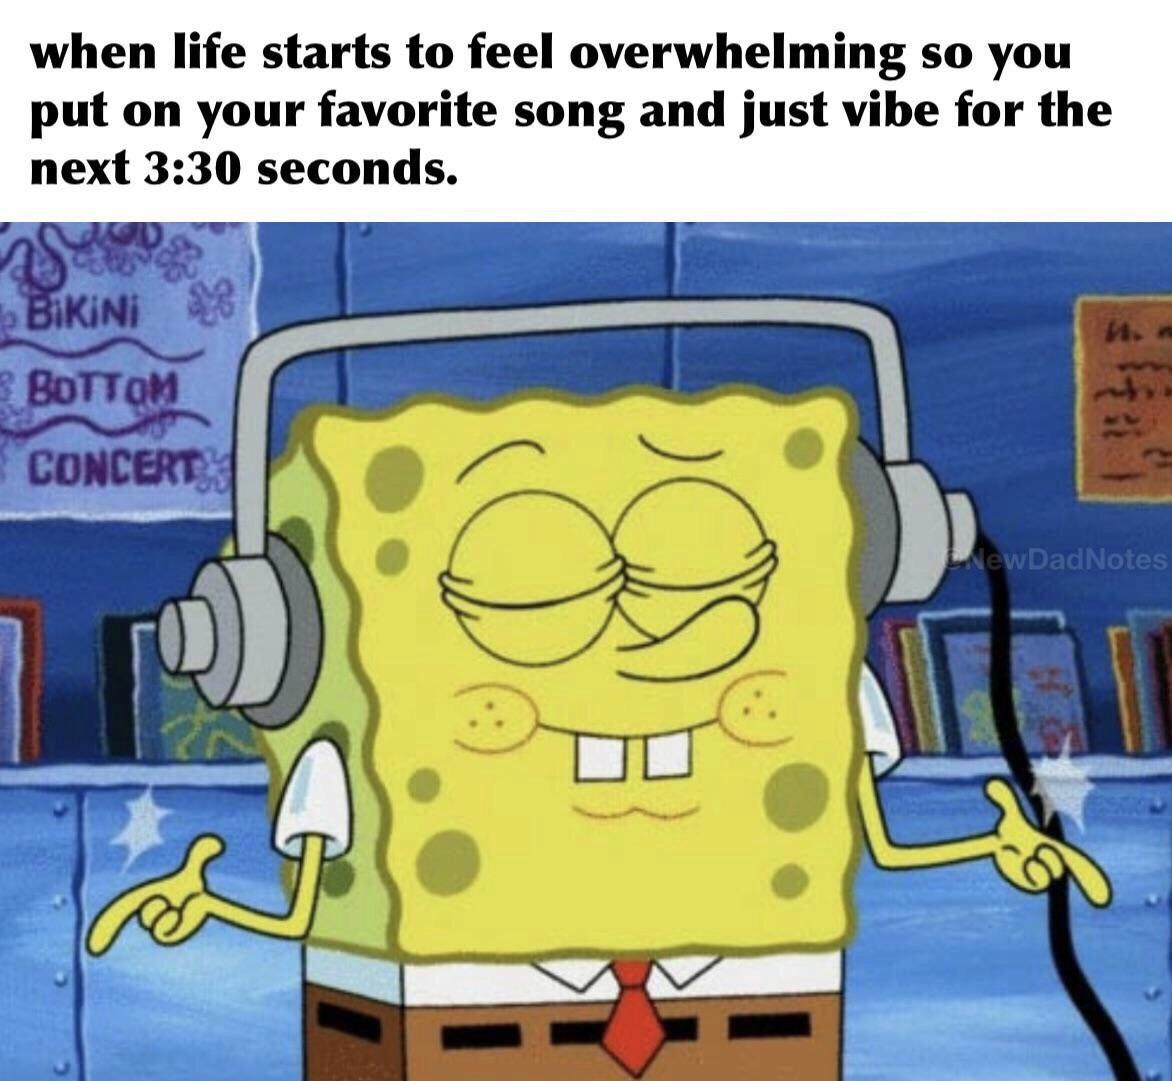 spongebob listening to music meme - when life starts to feel overwhelming so you put on your favorite song and just vibe for the next seconds. b Bikini 3 Bottom Concert New DadNotes